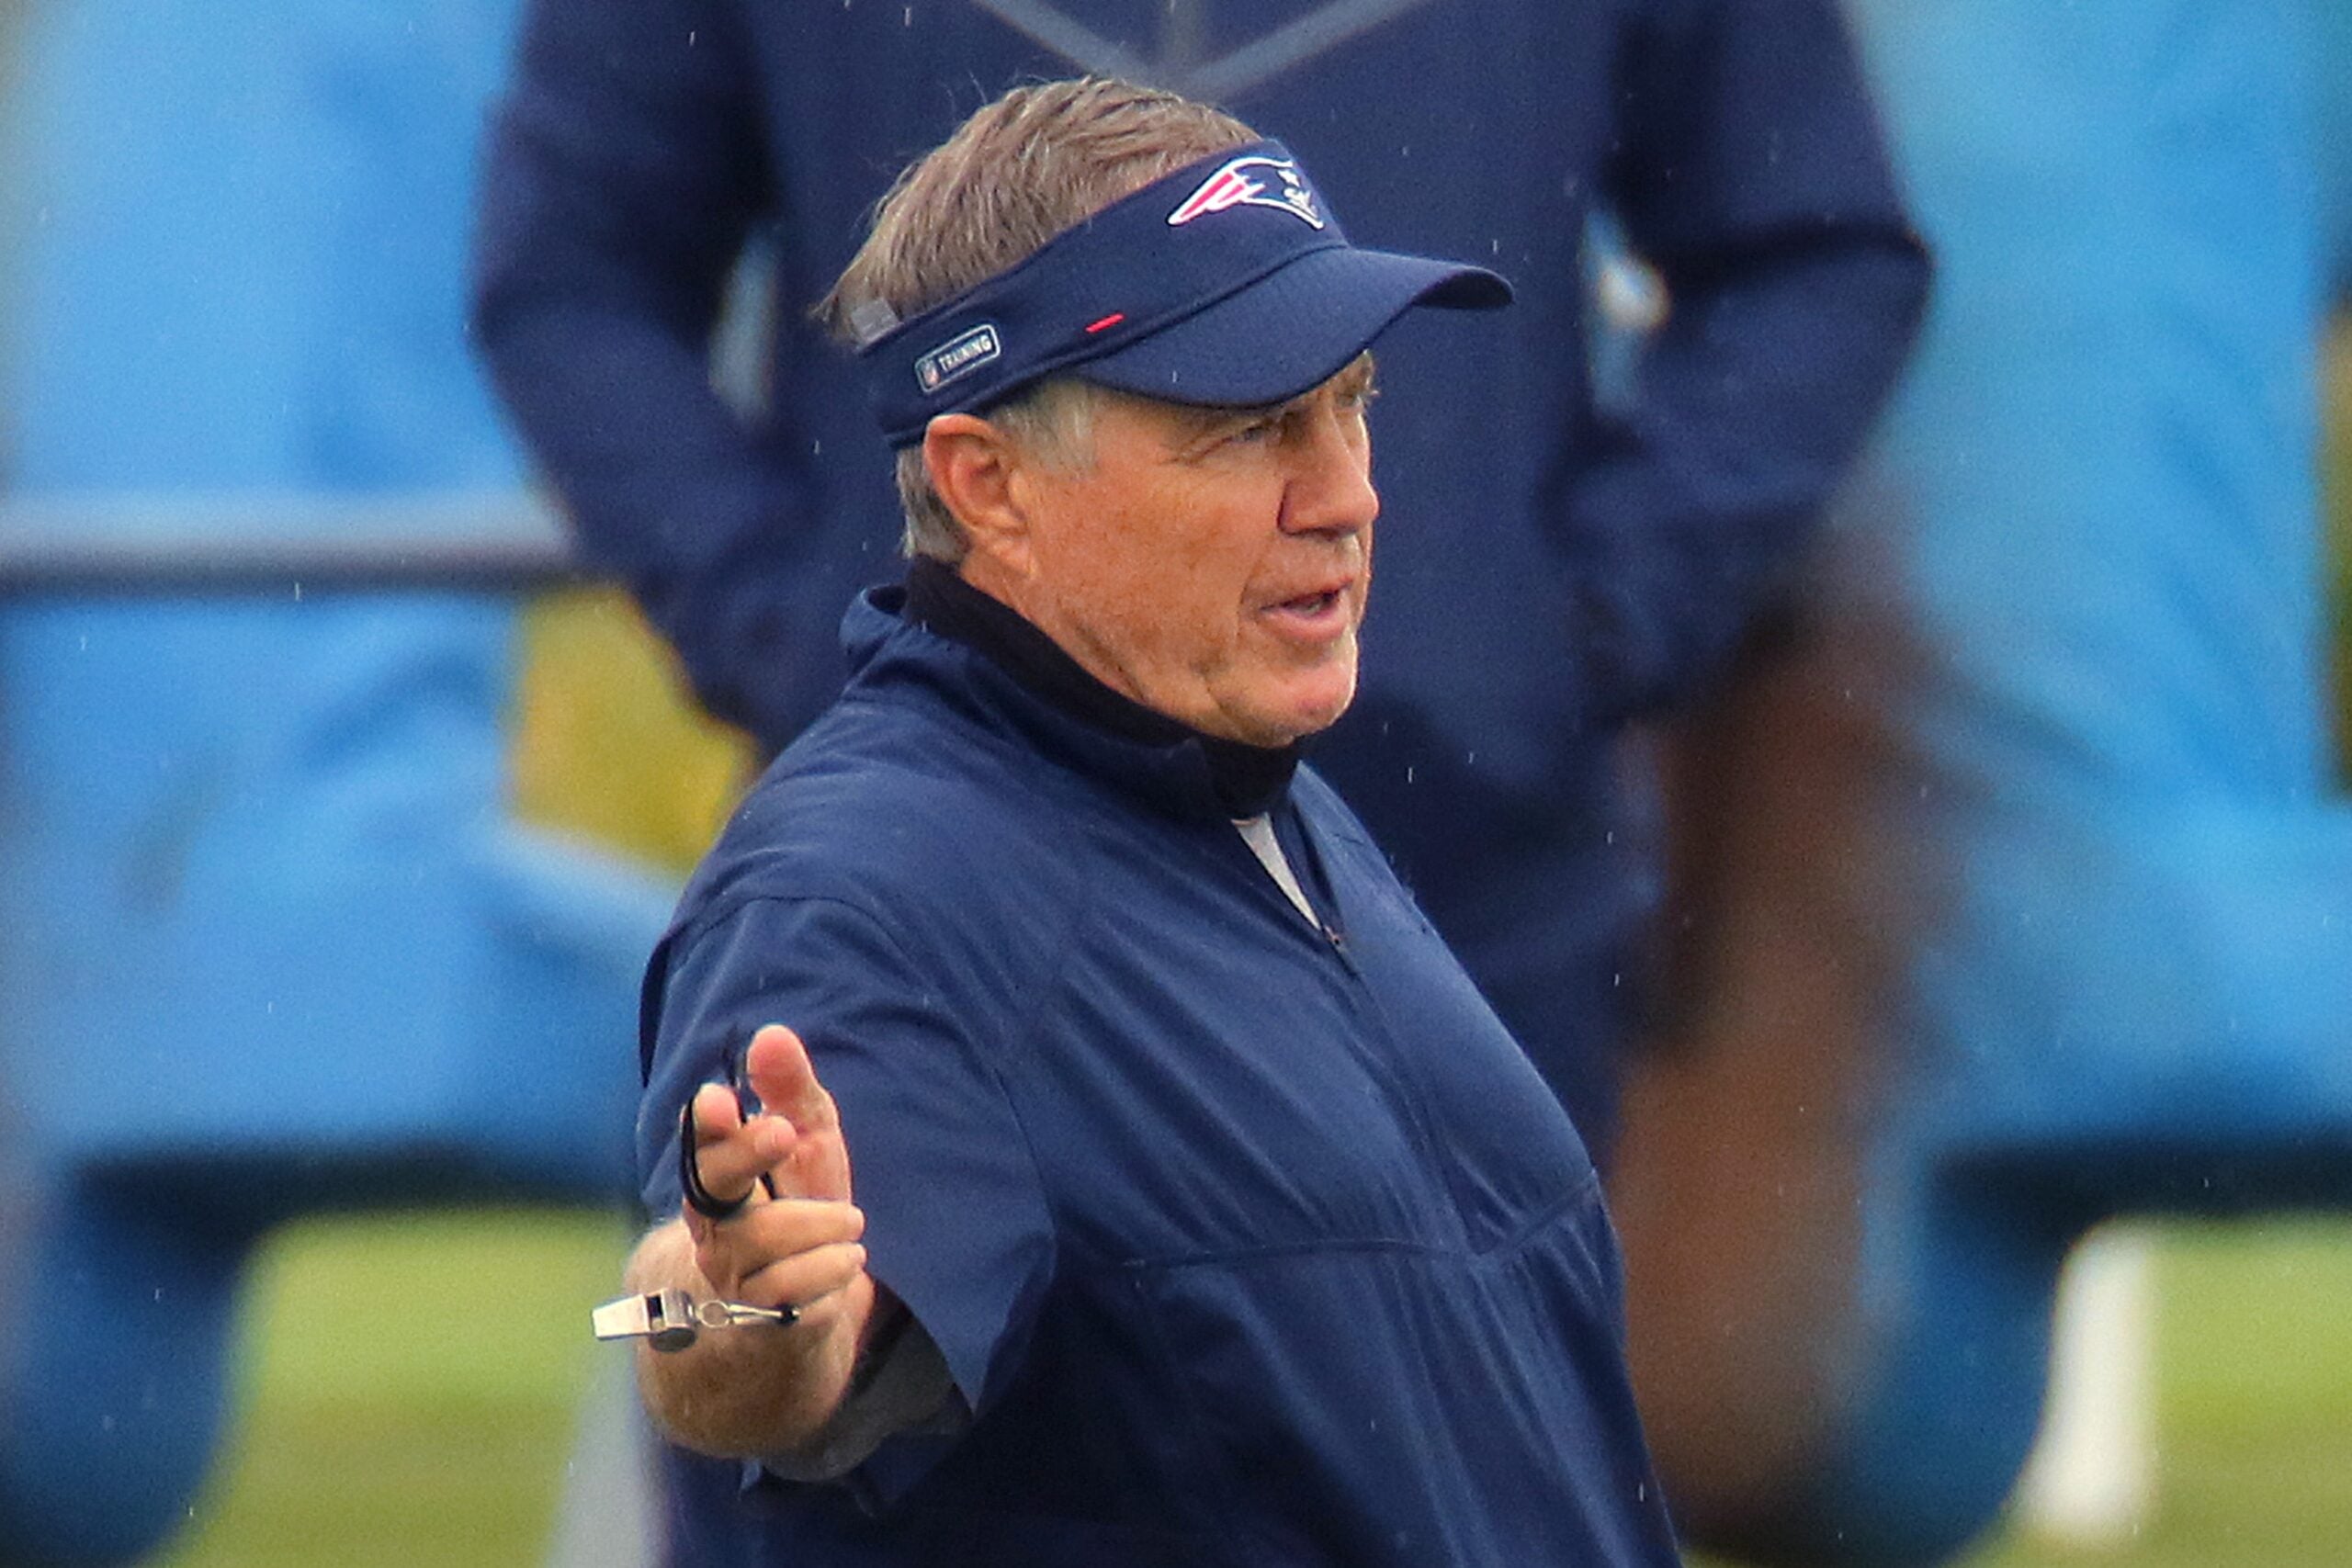 Bill Belichick stays on the move while coaching Patriots training